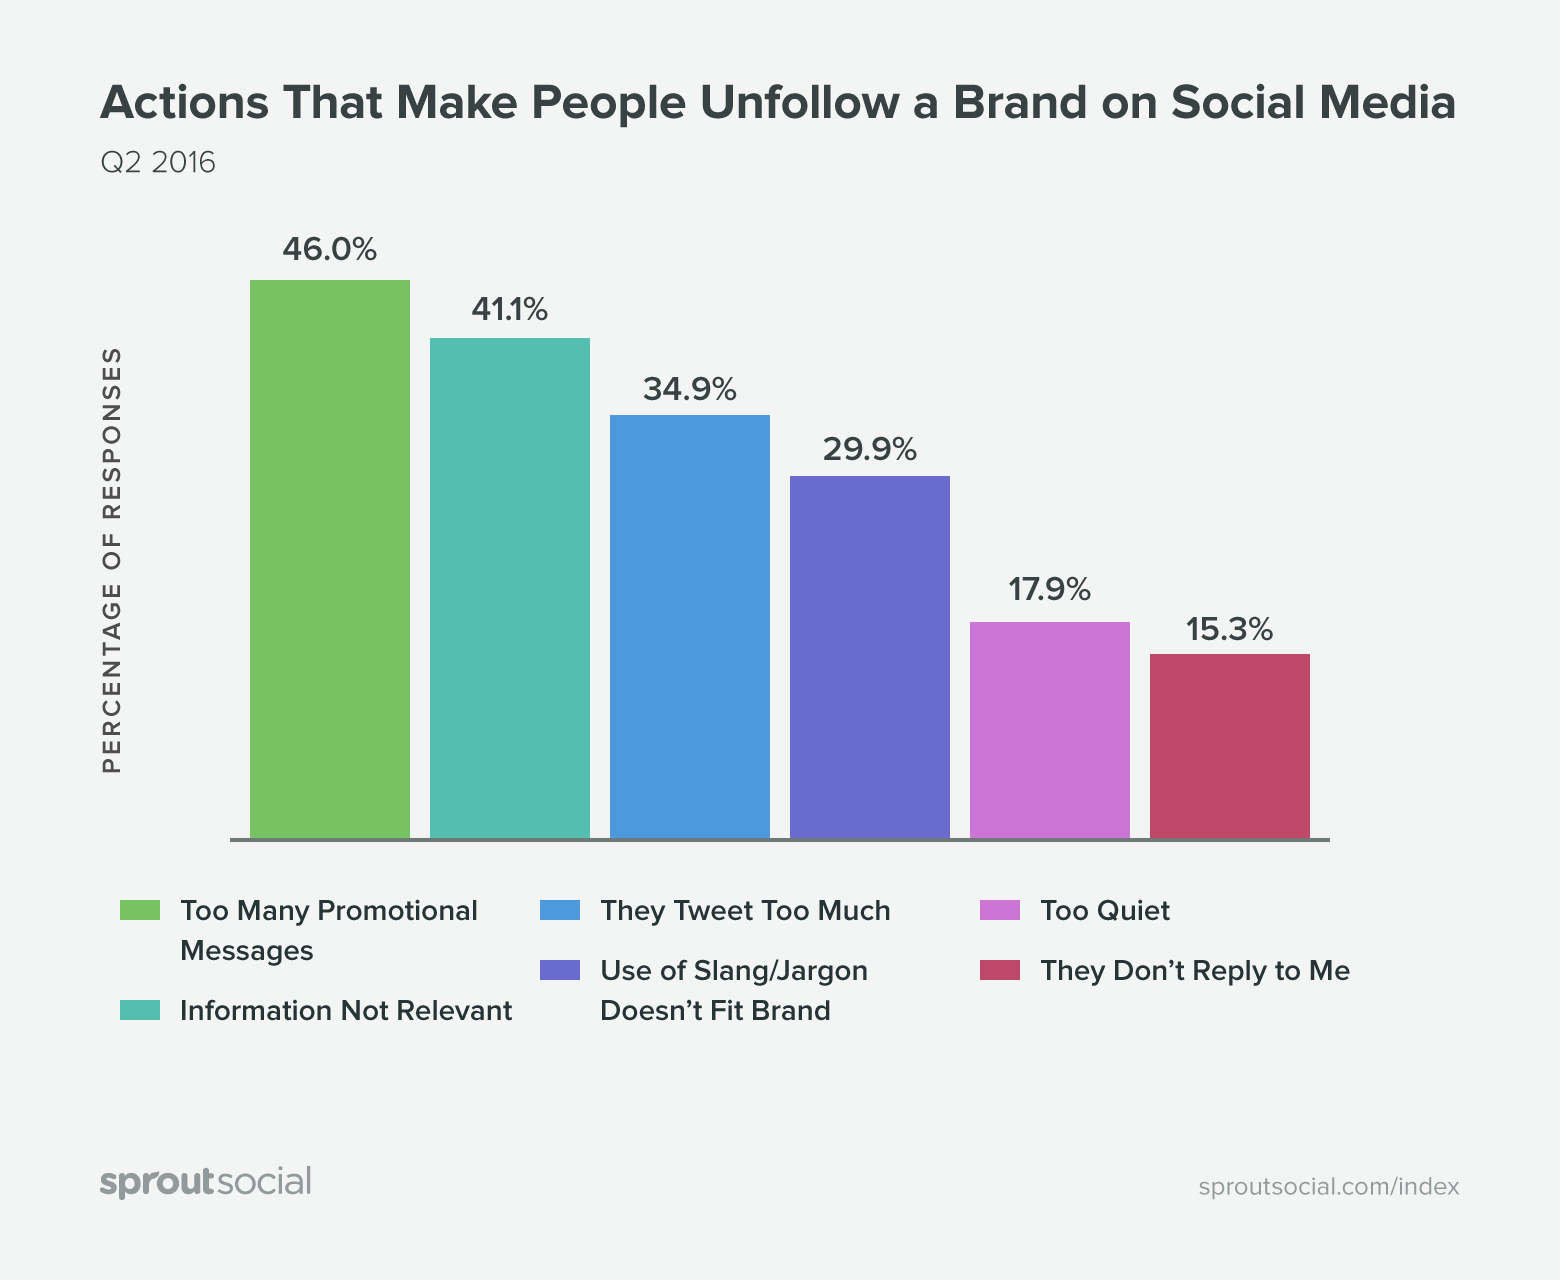 This graph shows that 46% of the people unfollow a brand on social media due to using too many ads.